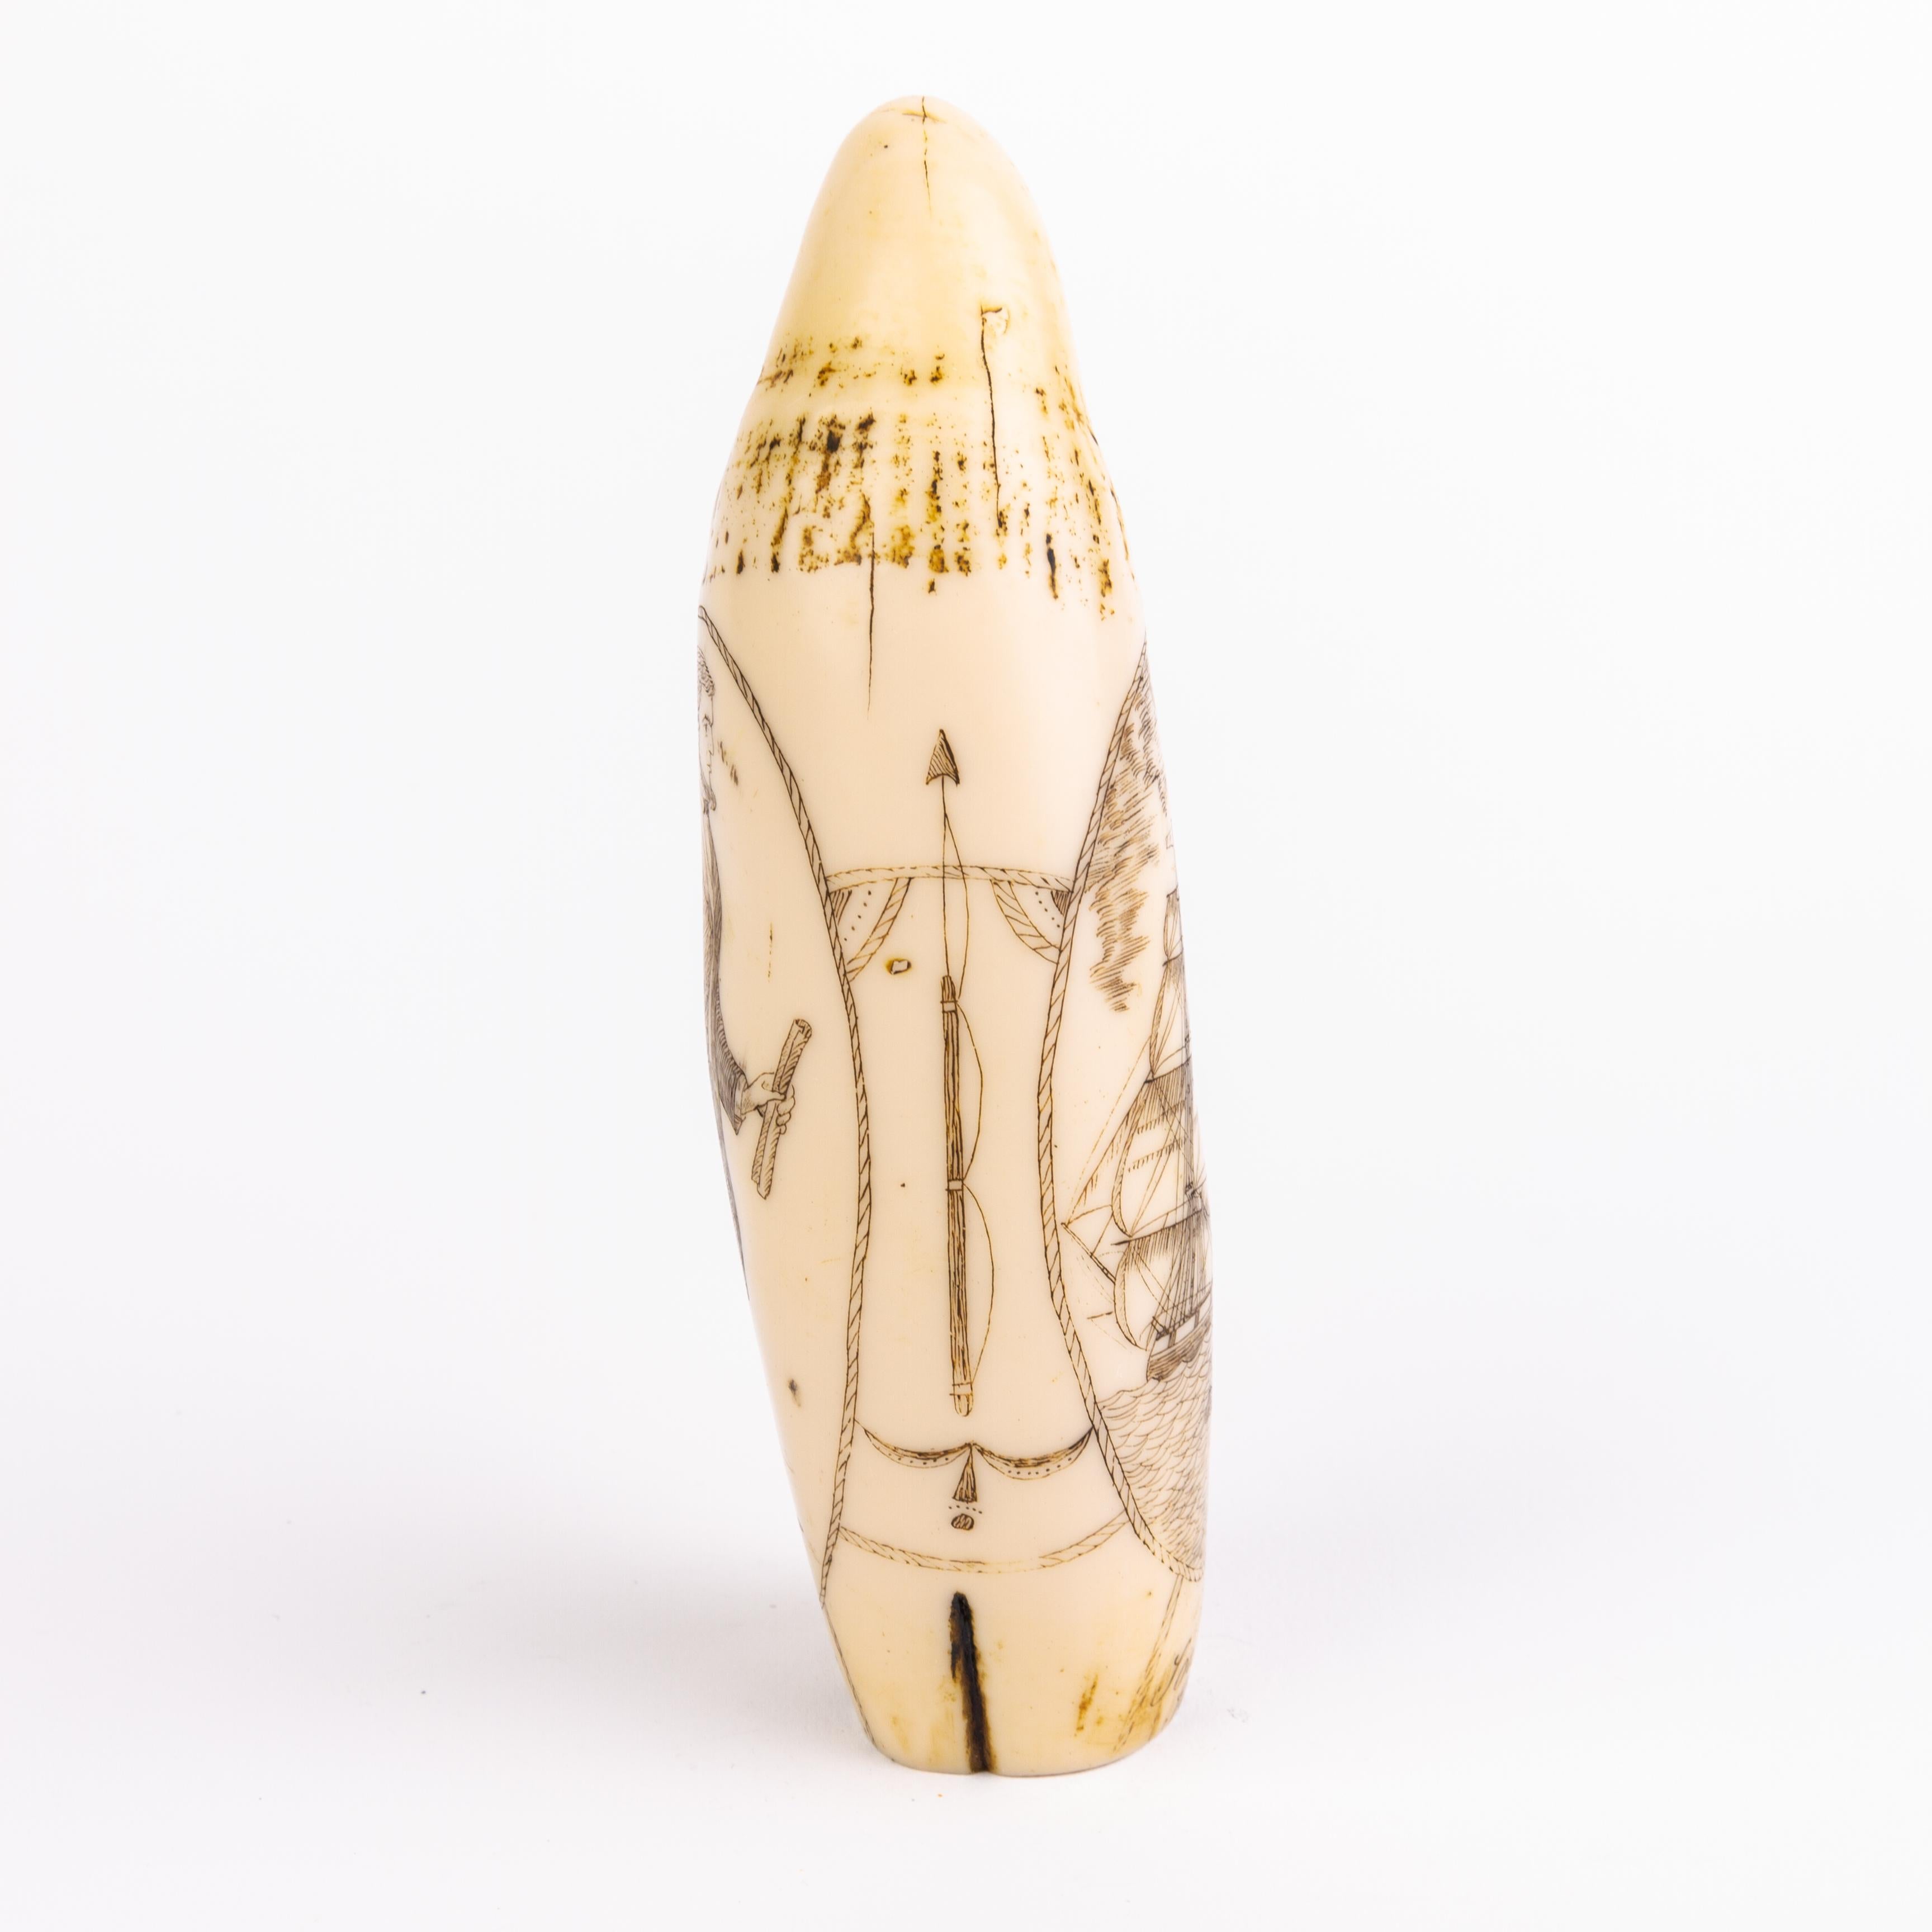 In good condition
From a private collection
Free international shipping
Sperm Whale Scrimshaw Nautical Faux Tooth 